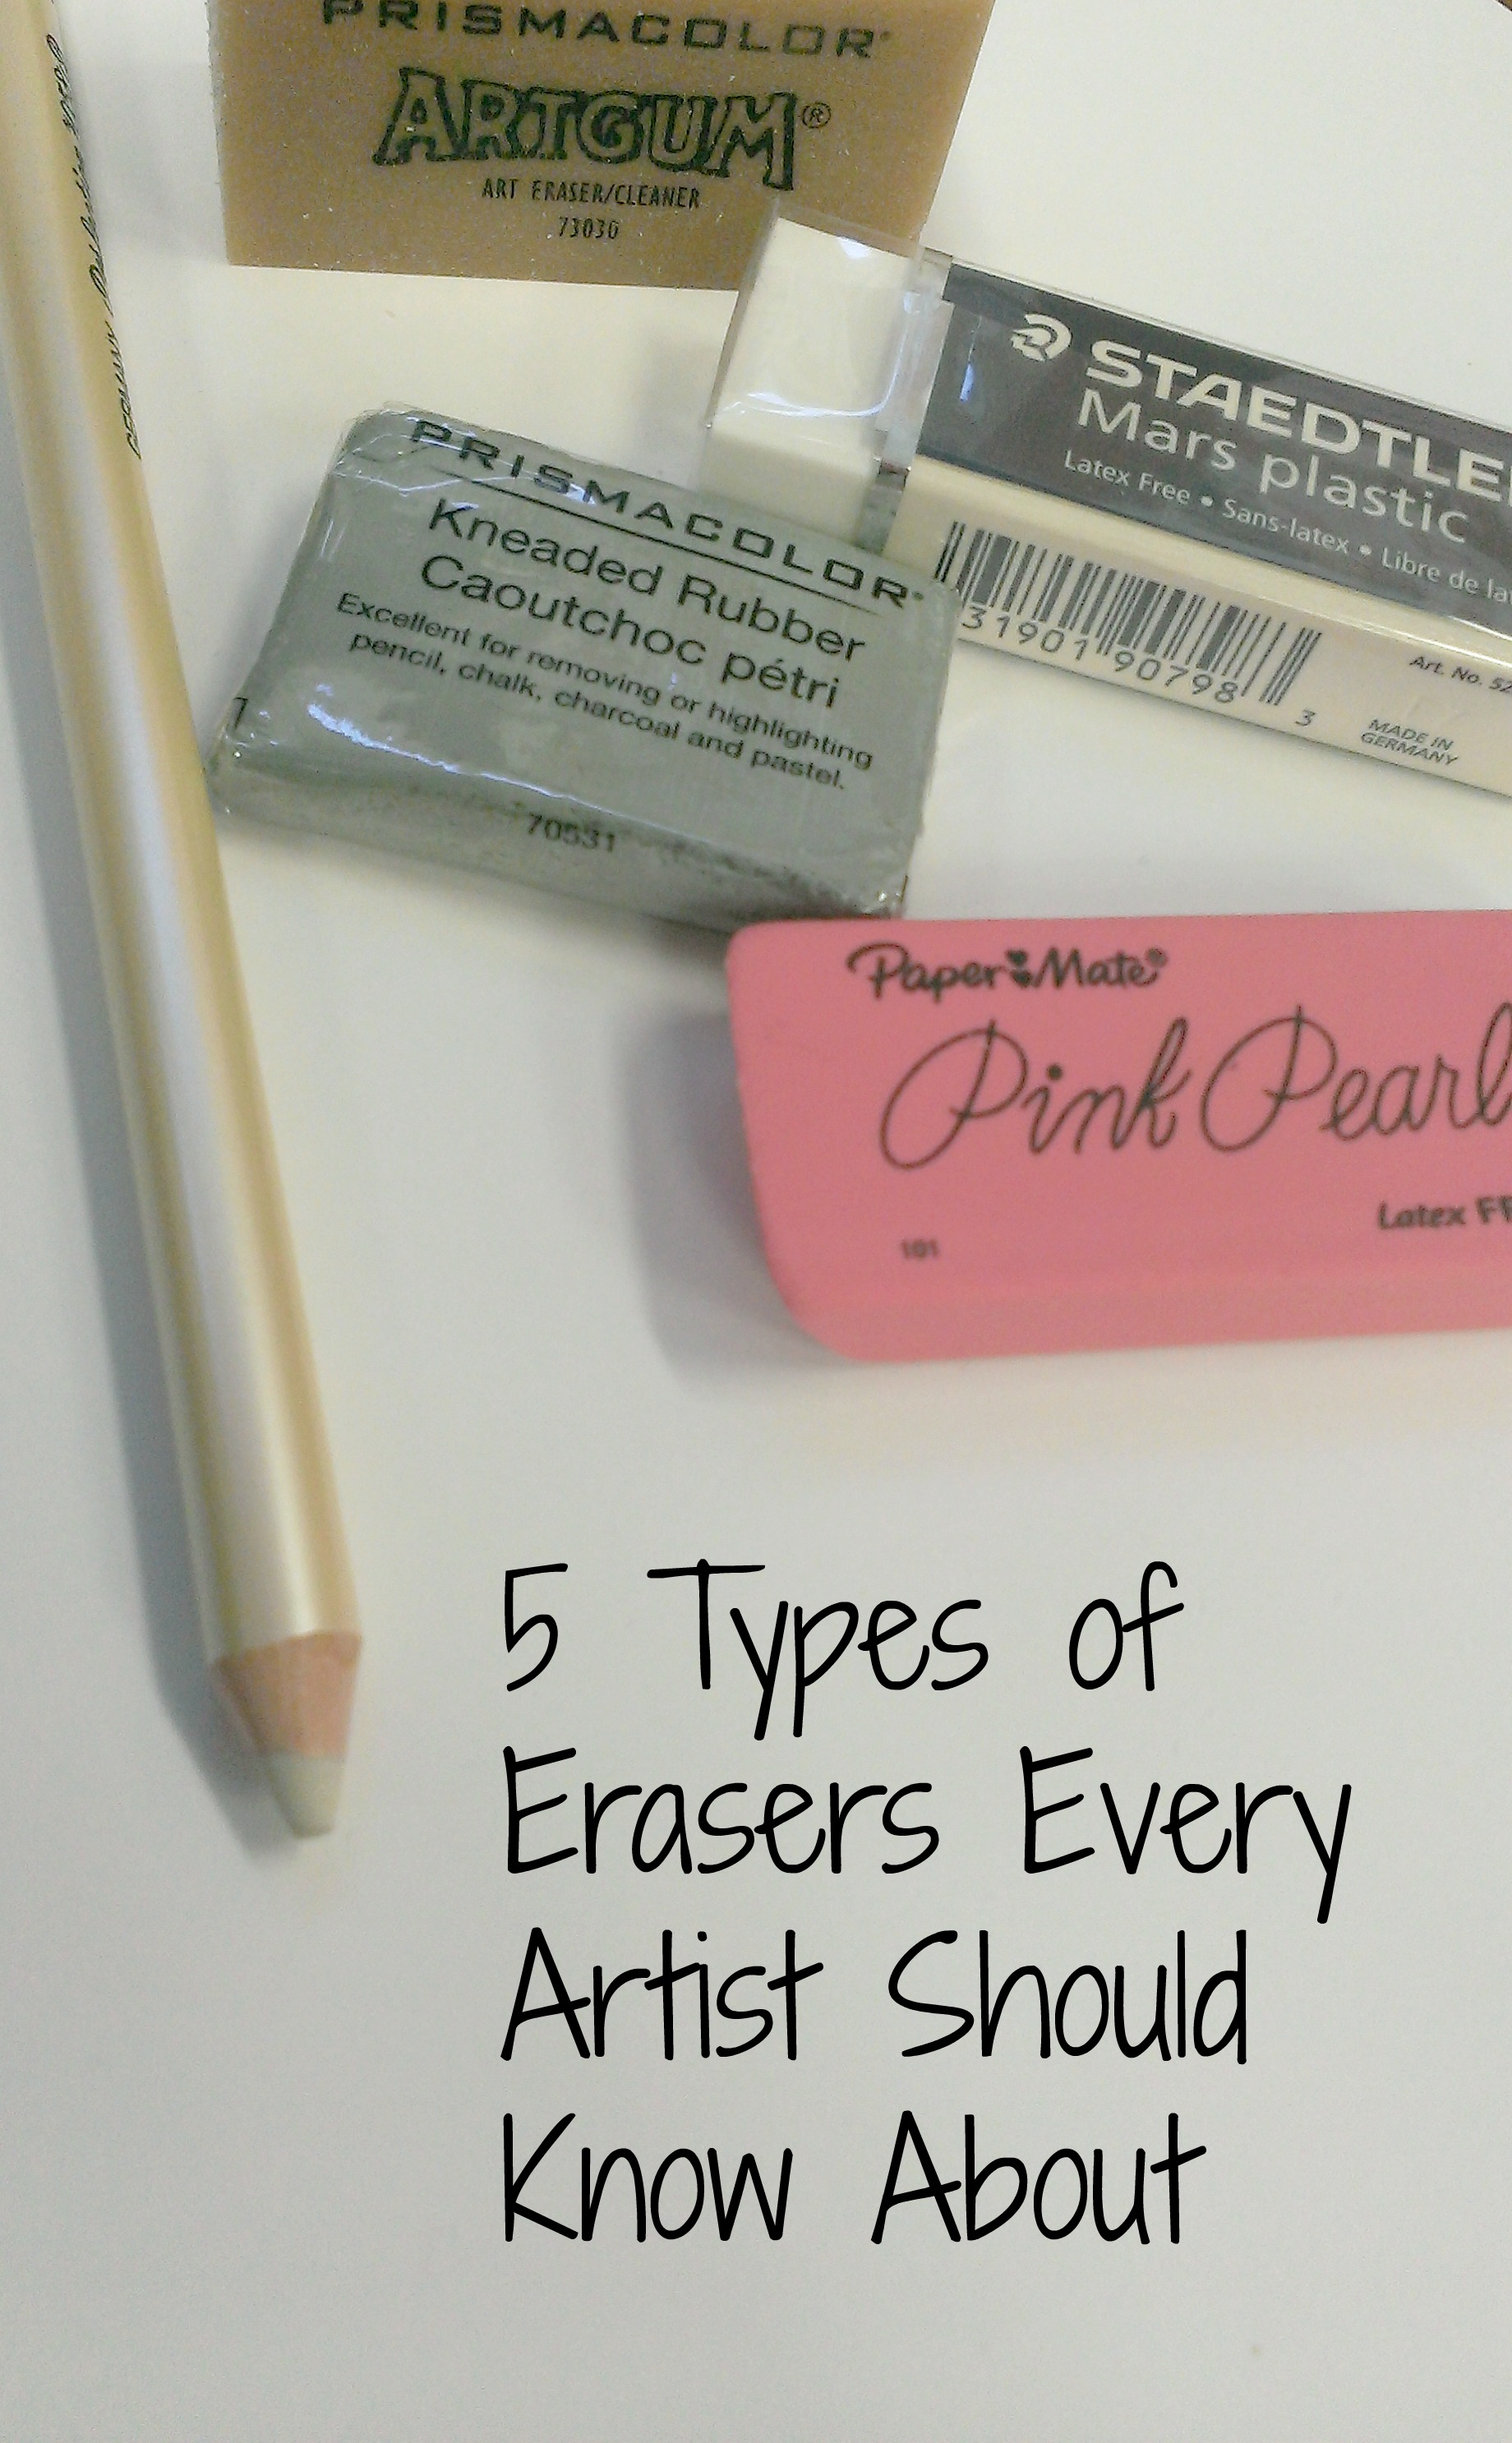 5 Types of Erasers Every Artist Should Know About, Art Inspiration, Inspiration, Art Techniques, Encouragement